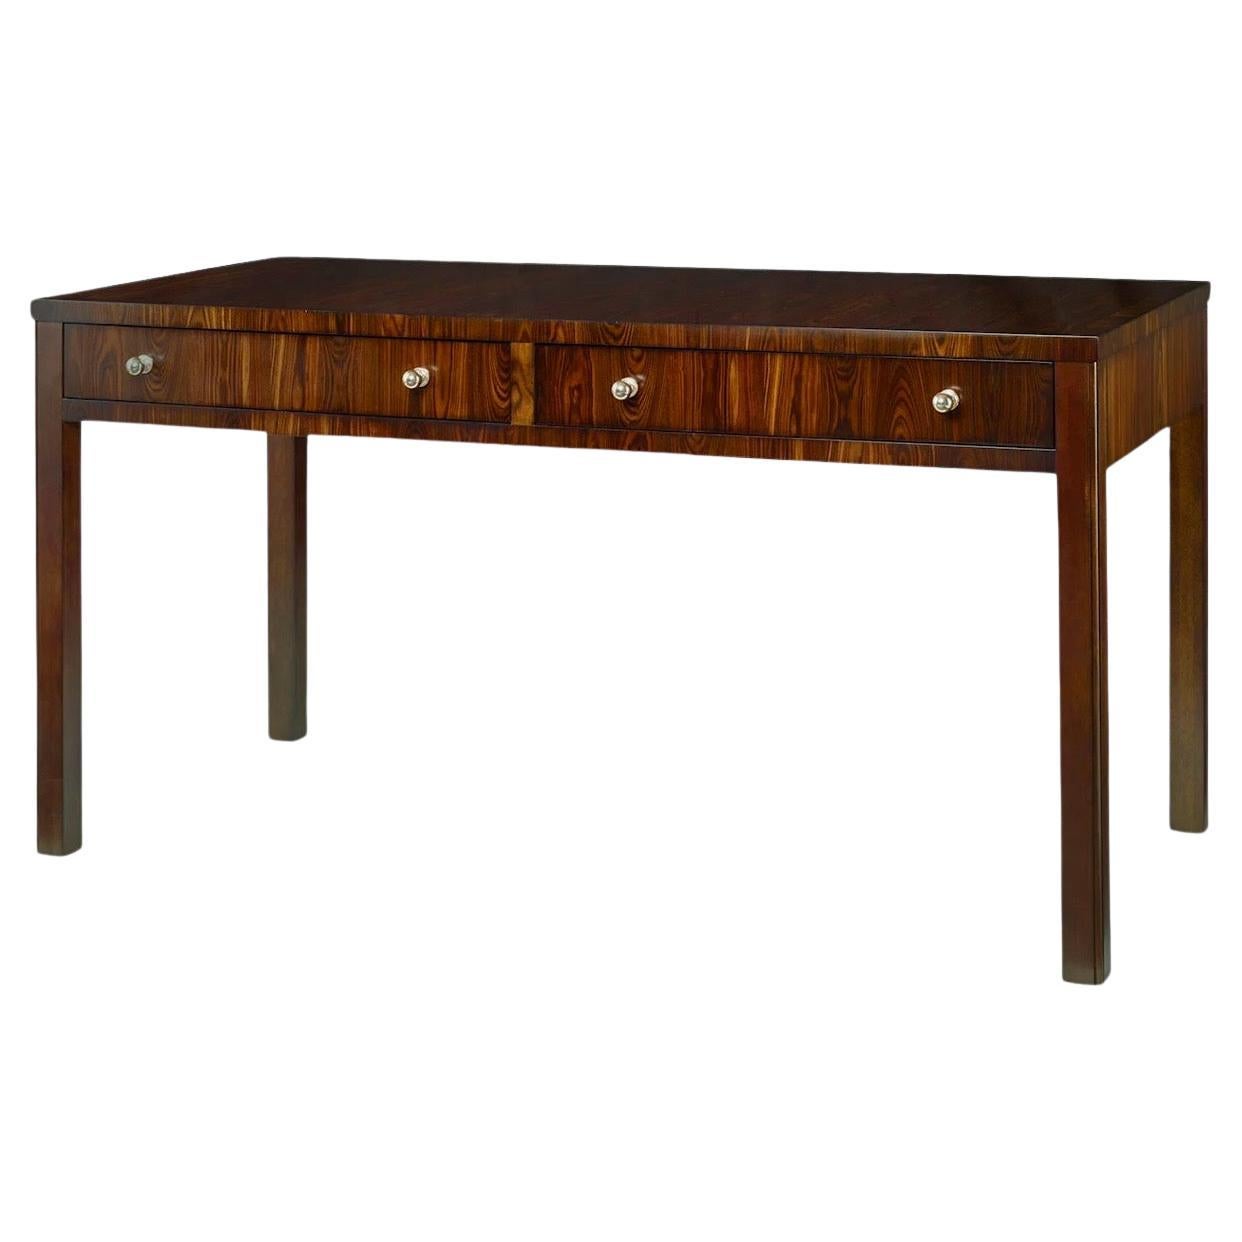 This is a beautiful desk designed by Thomas O’Brien for Century. It is a compilation of kingwood veneers over mahogany, which gives it a rosewood effect. It has two drawers and is marked. 

My shipping is for the Continental US only and can run two